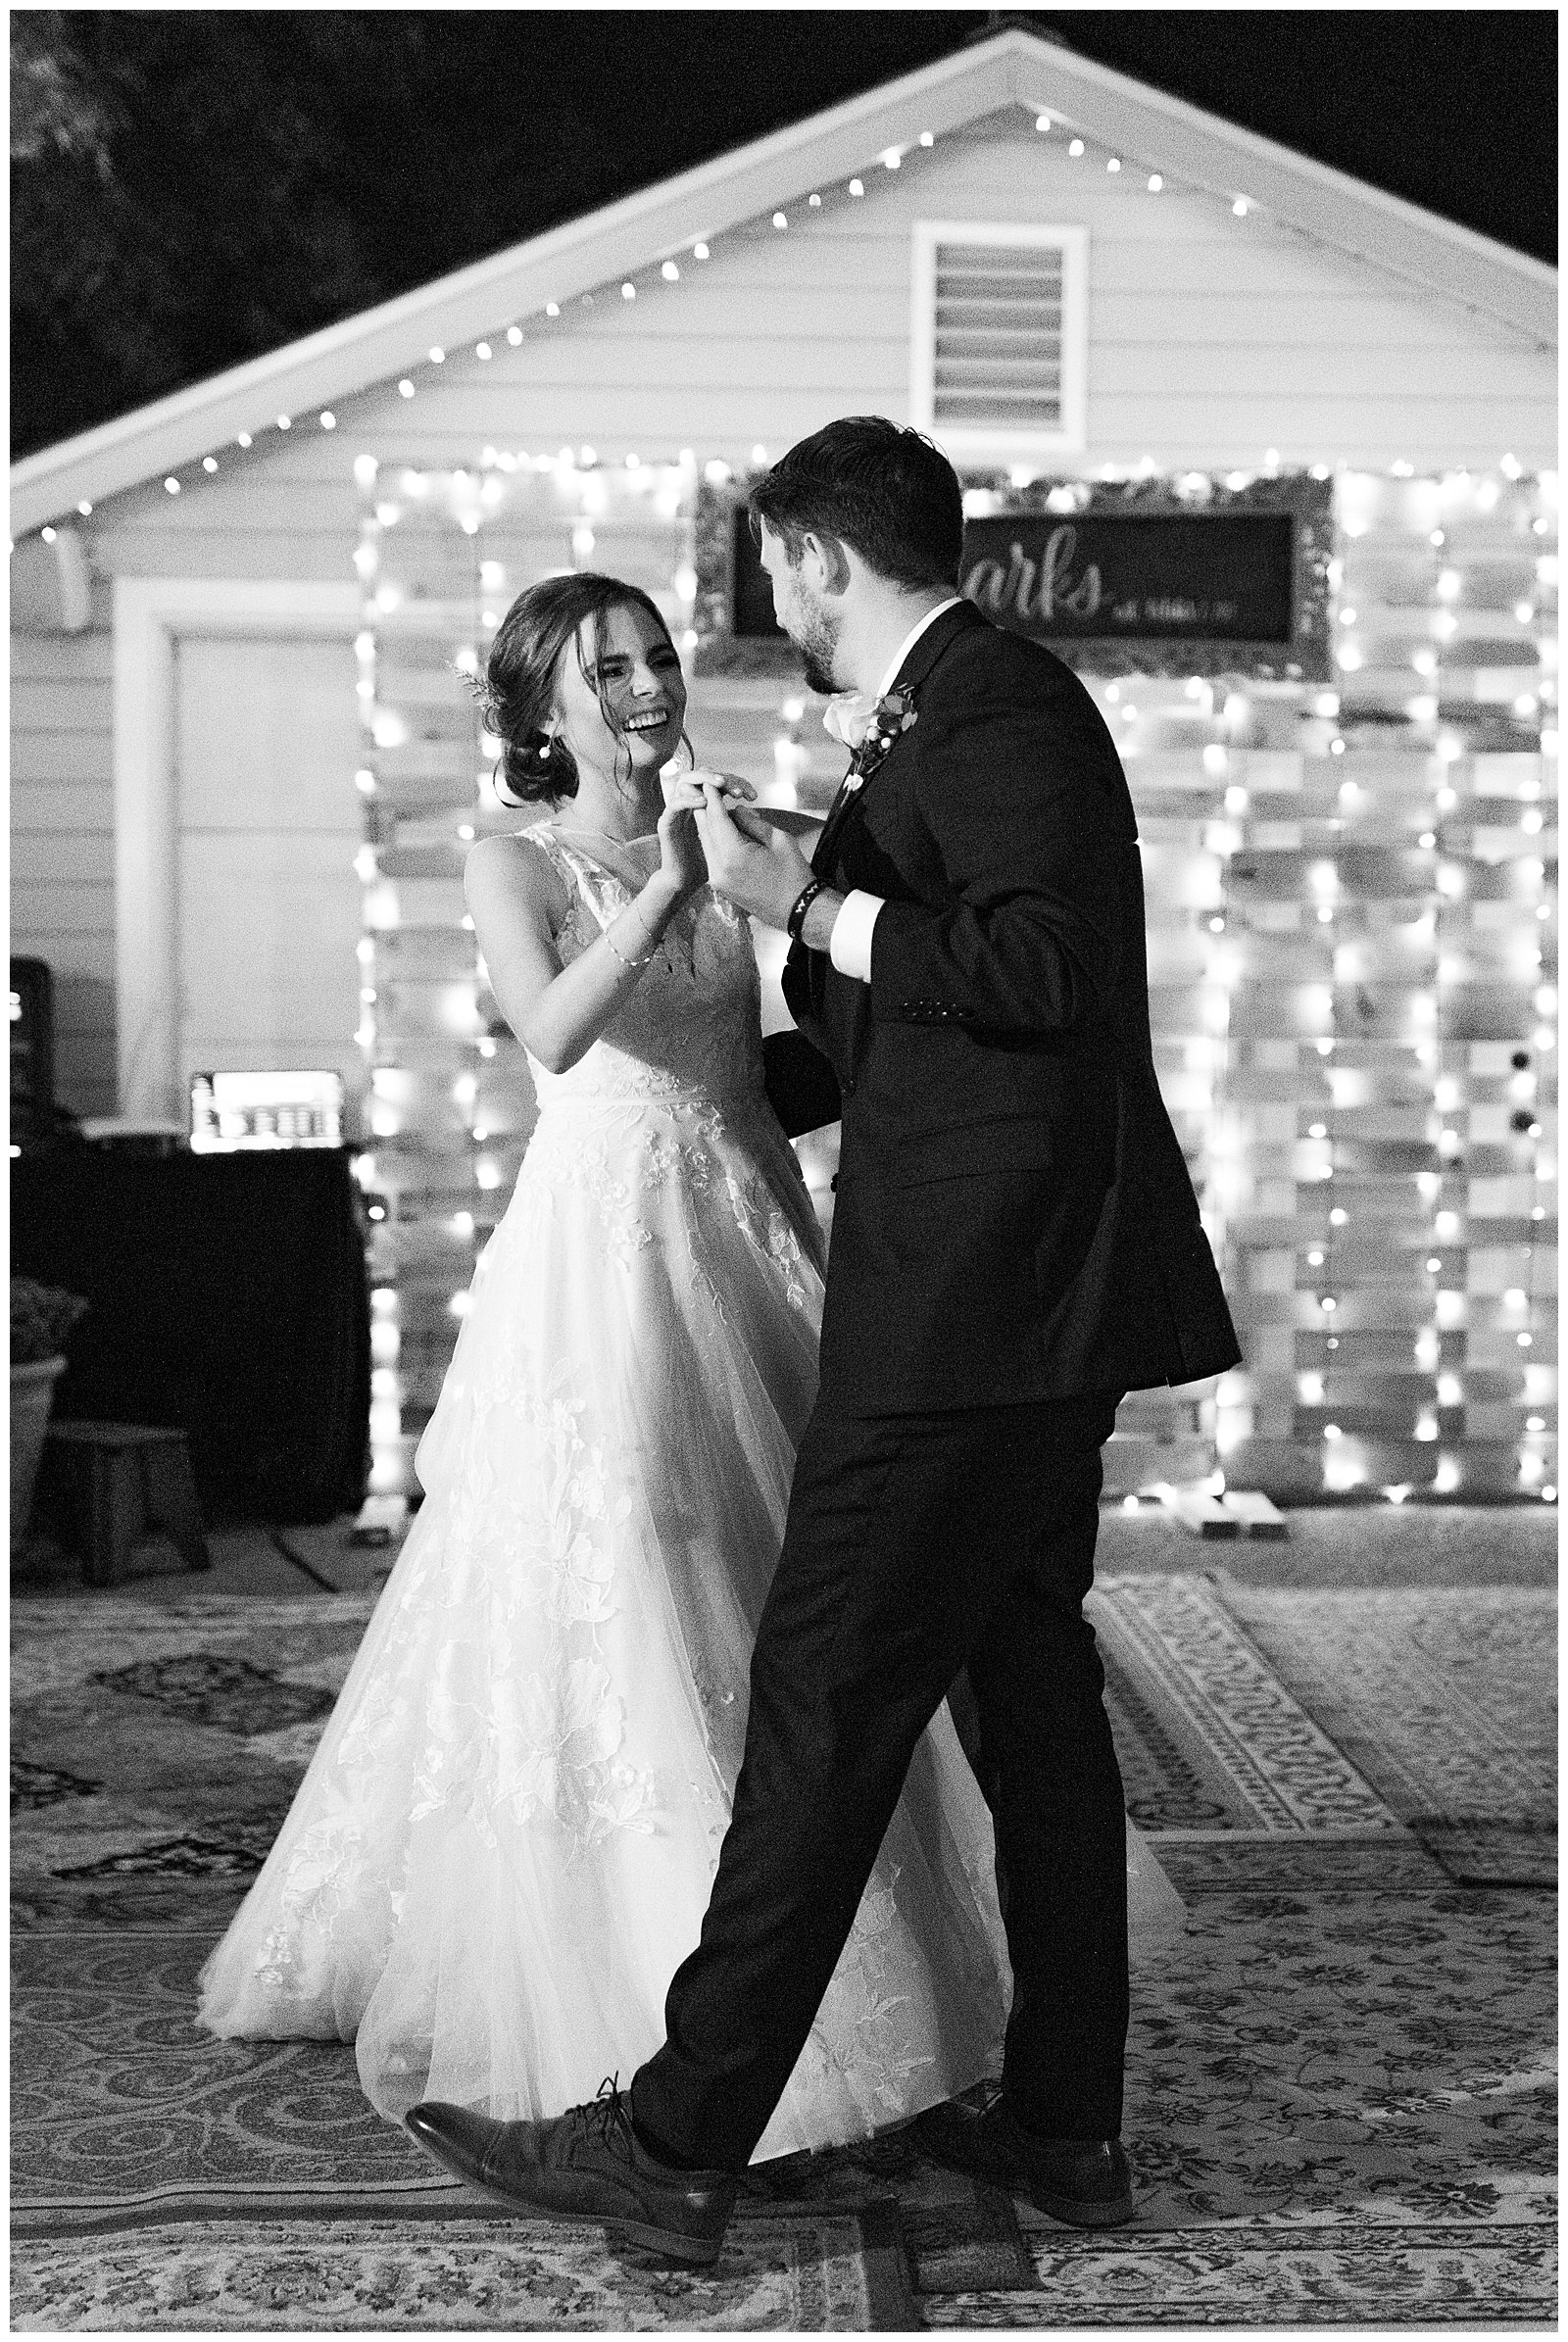 black and white image bride and groom dancing at reedley wedding at night smiling